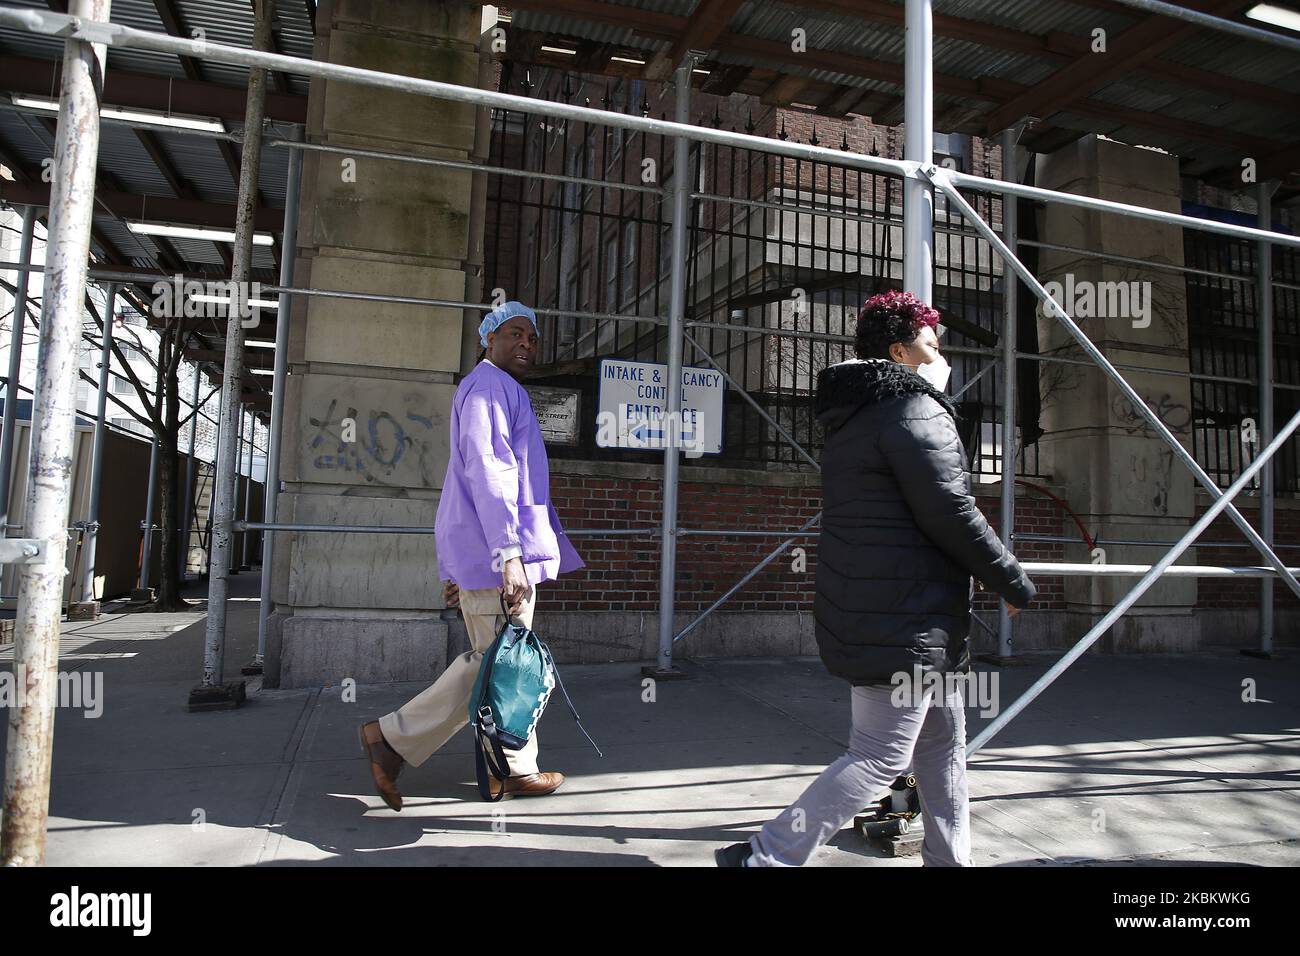 A health professional walks along 1st avenue in New York, United States, on April 1, 2020. As New York City is faced with a raging number of COVID-19 cases, now reaching 47,439, the city has put out a nationwide call for more health professionals and ambulances. Coronavirus cases in New York State, now over 75,000, have surpassed all nations affected by the pandemic. (Photo by John Lamparski/NurPhoto) Stock Photo